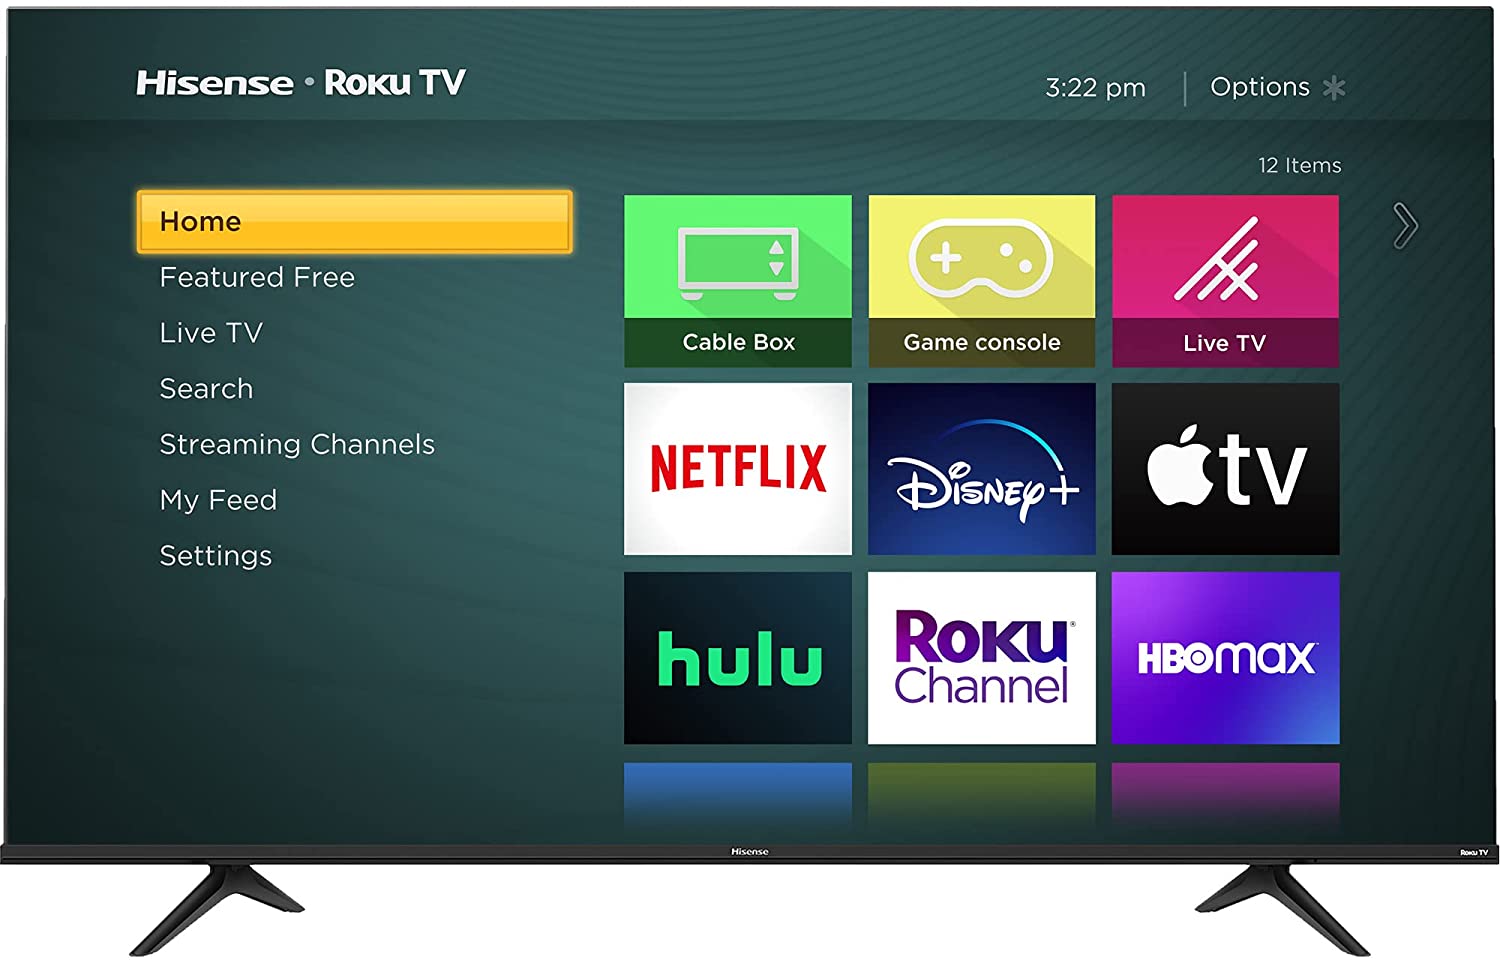 Hisense 50-Inch Class R6 Series Dolby Vision HDR 4K UHD Roku Smart TV with Alexa Compatibility (50R6G, 2021 Model)